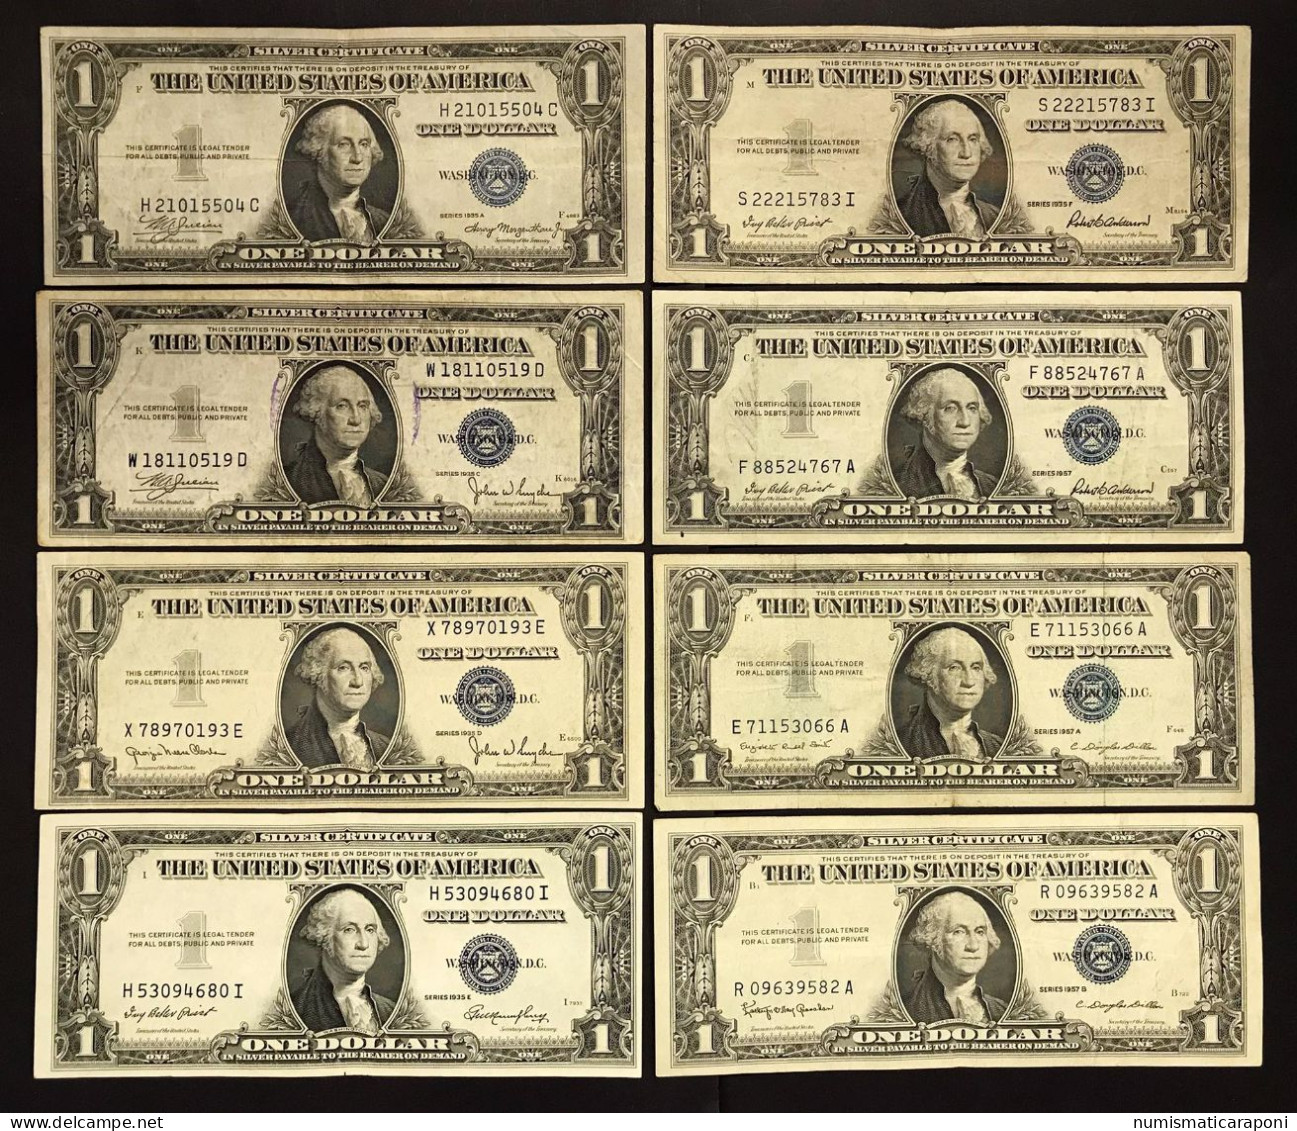 Usa U.s.a. Stati Uniti 1935 A C D E + 1957 + A B F $1 DOLLAR BILL UNITED STATES LEGAL TENDER NOTE Blue Seal  LOTTO.620 - Certificats D'Argent (1878-1923)